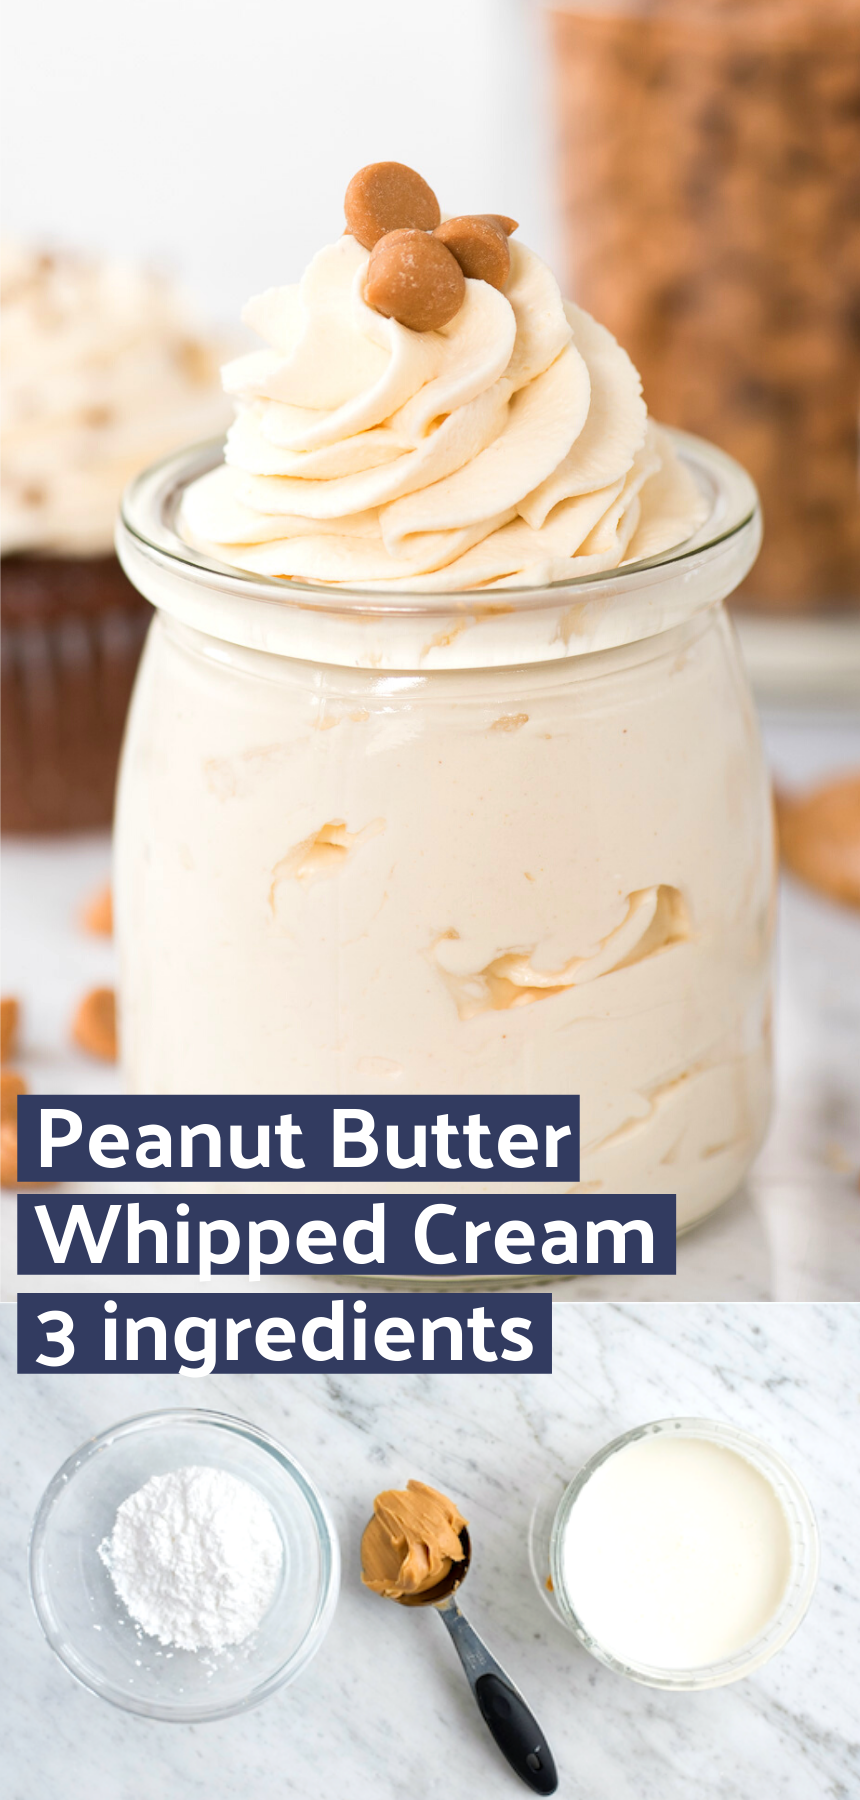 Peanut Butter Whipped Cream -   17 cake Easy whipped topping ideas